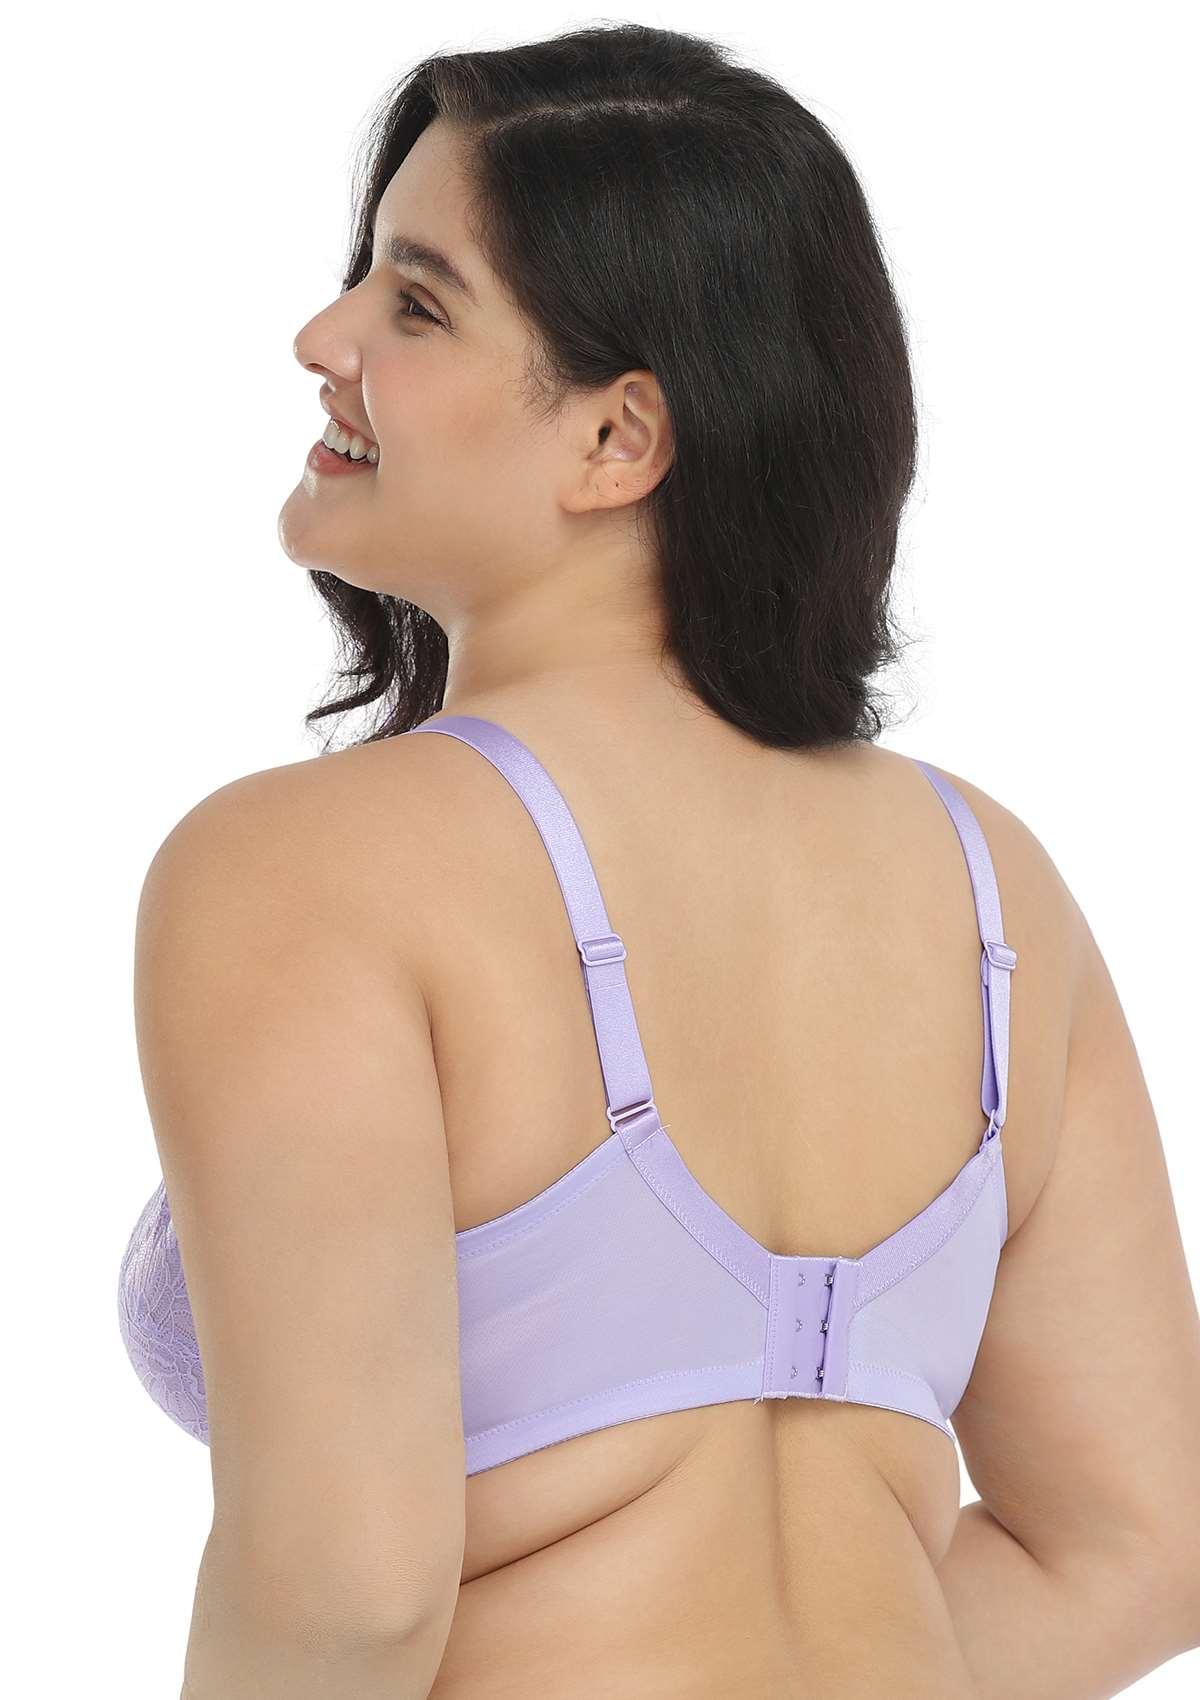 HSIA Blossom Transparent Lace Bra: Plus Size Wired Back Smoothing Bra - Light Purple / 46 / C